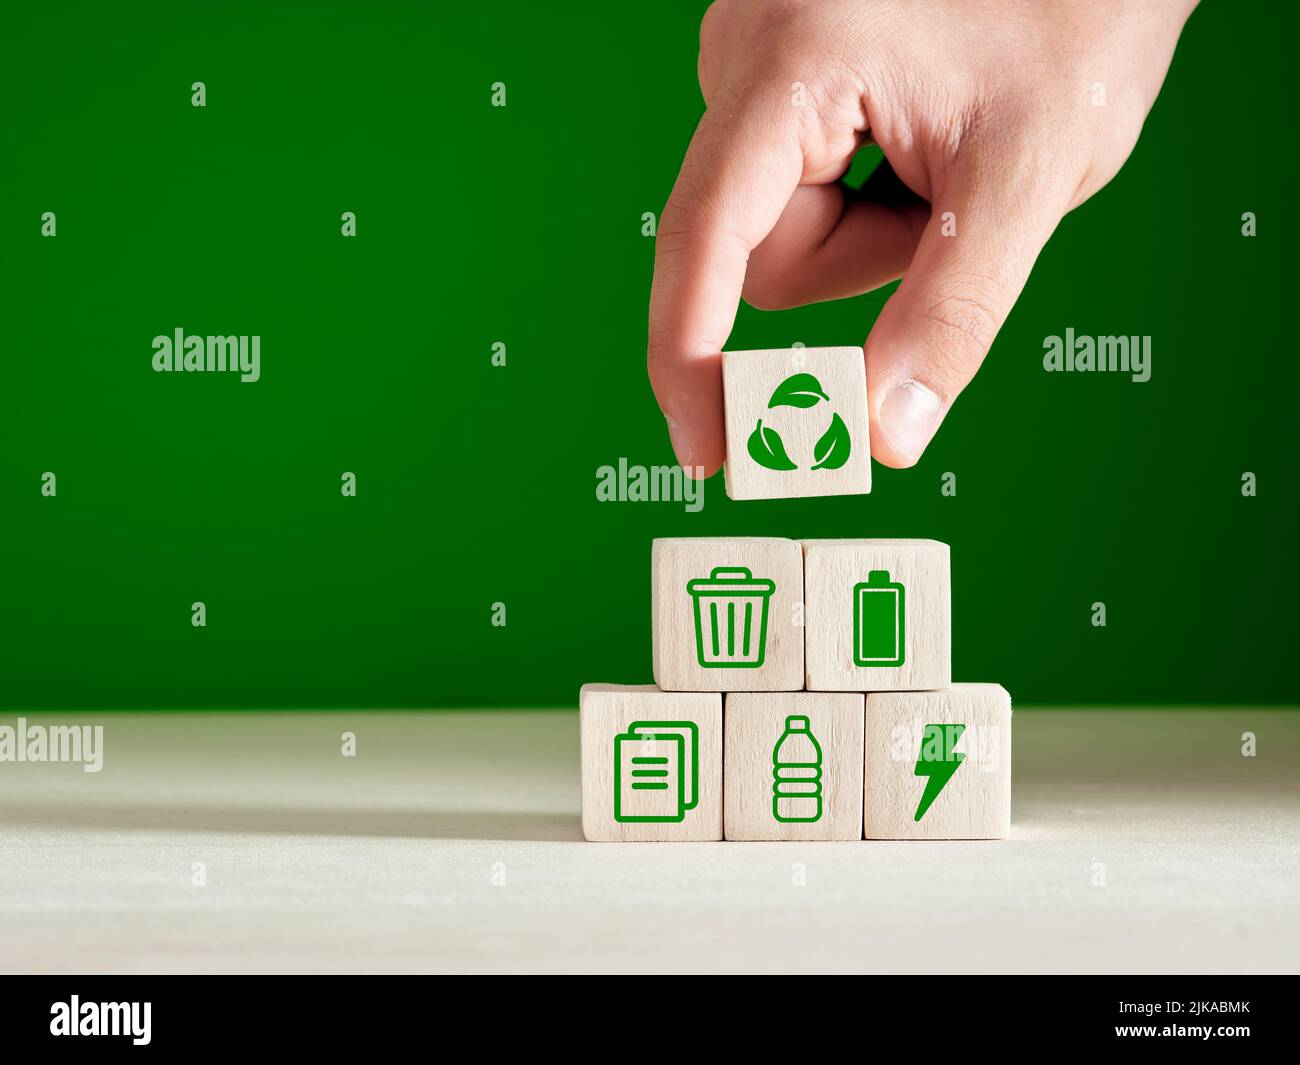 Recycling and environmental protection concept. Environment sustainable development. Hand puts recycling product material symbols on green background. Stock Photo